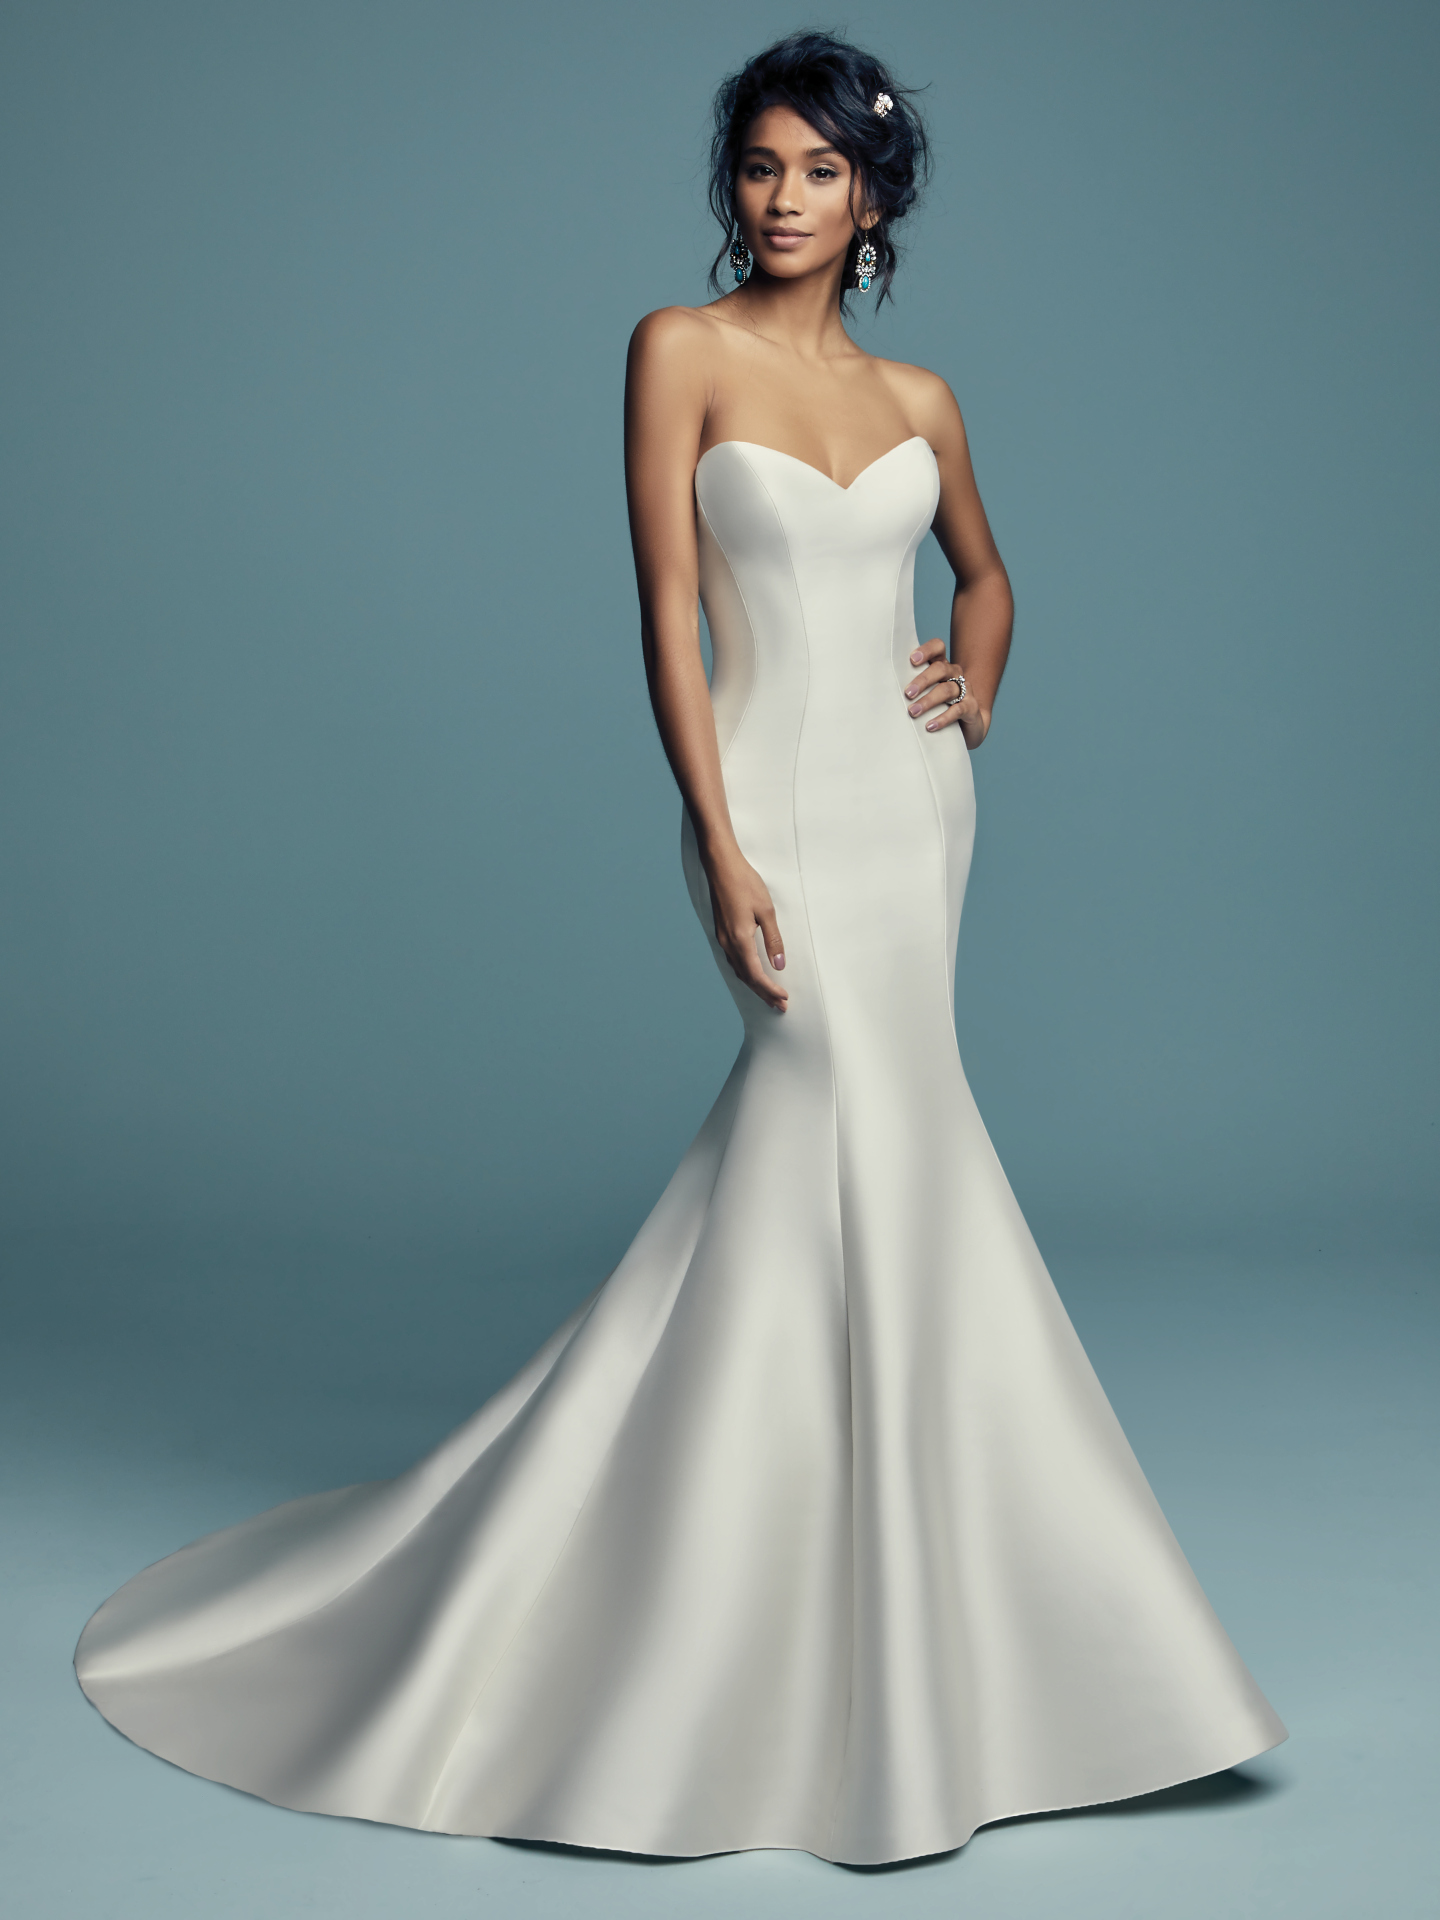 Silk and Silk Alternatives for the Glamorous Bride - Cassidy wedding dress by Sottero and Midgley